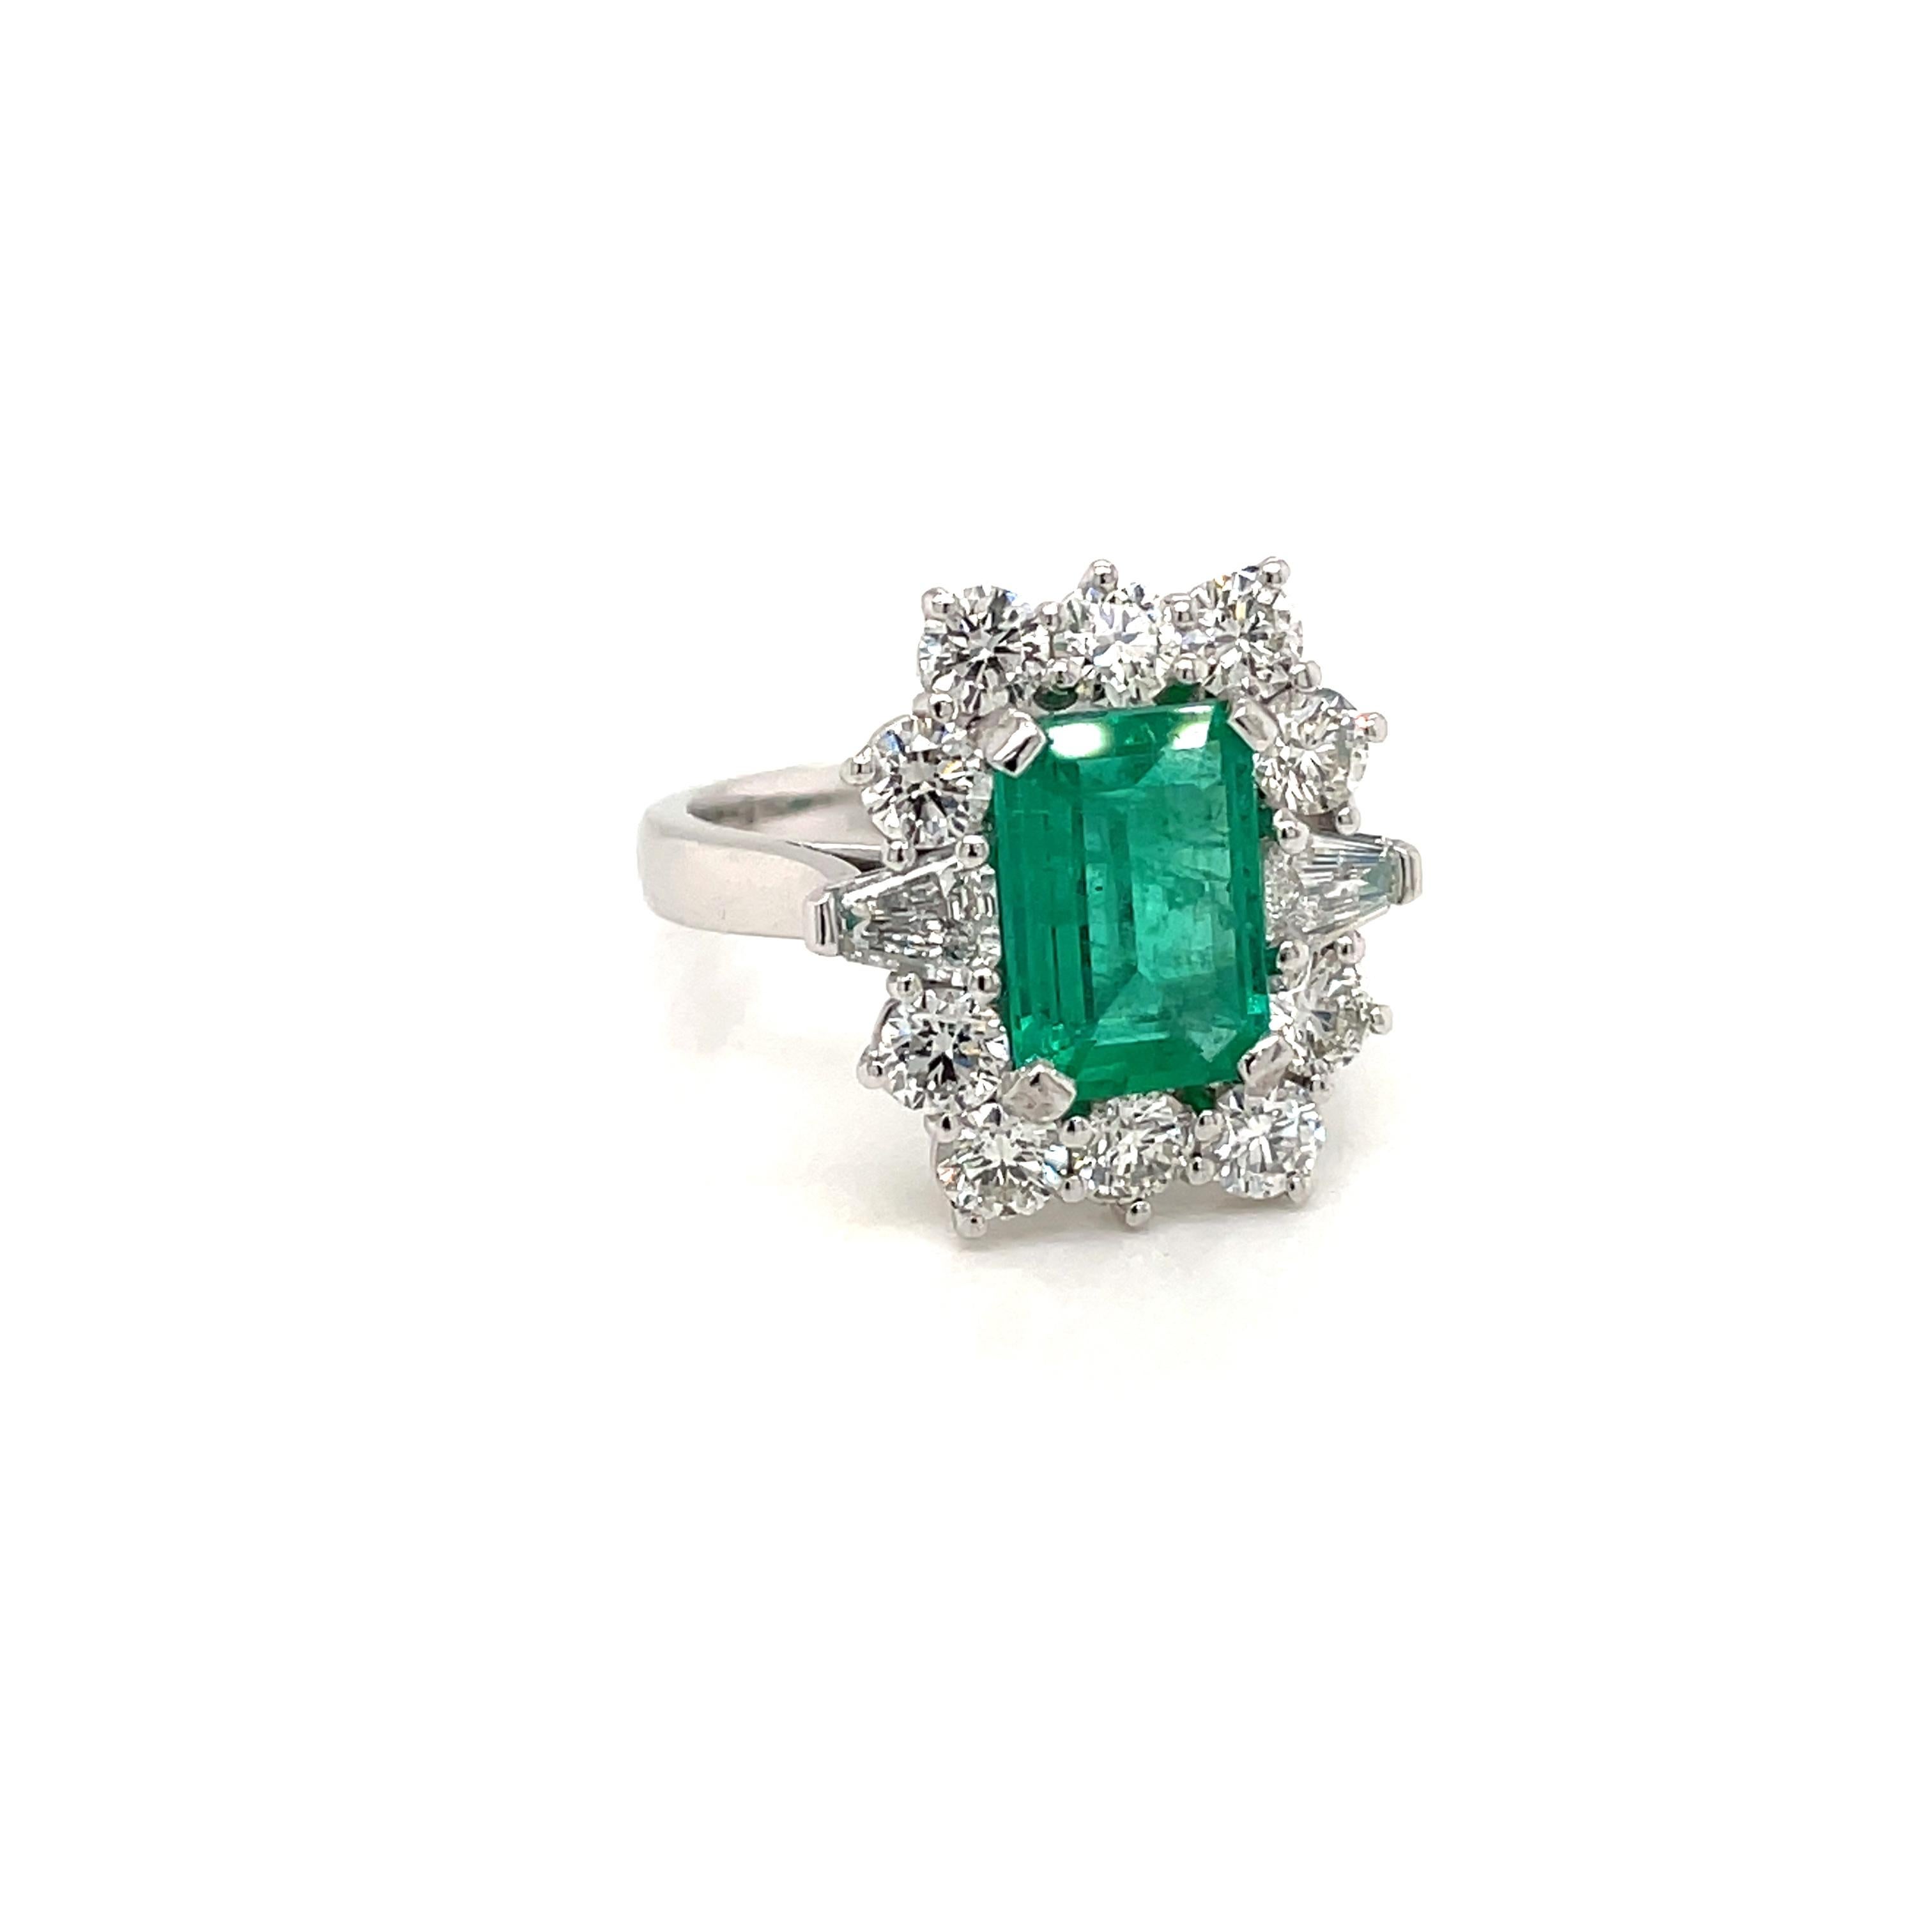 A beautiful and impressive Platinum Gold engagement ring showcasing a natural Vivid Colombian Emerald 2.50 carats of great quality, surrounded by  10 Sparkling Round brilliant cut diamonds and two trapezoid cut on the sides, total weight 2.70